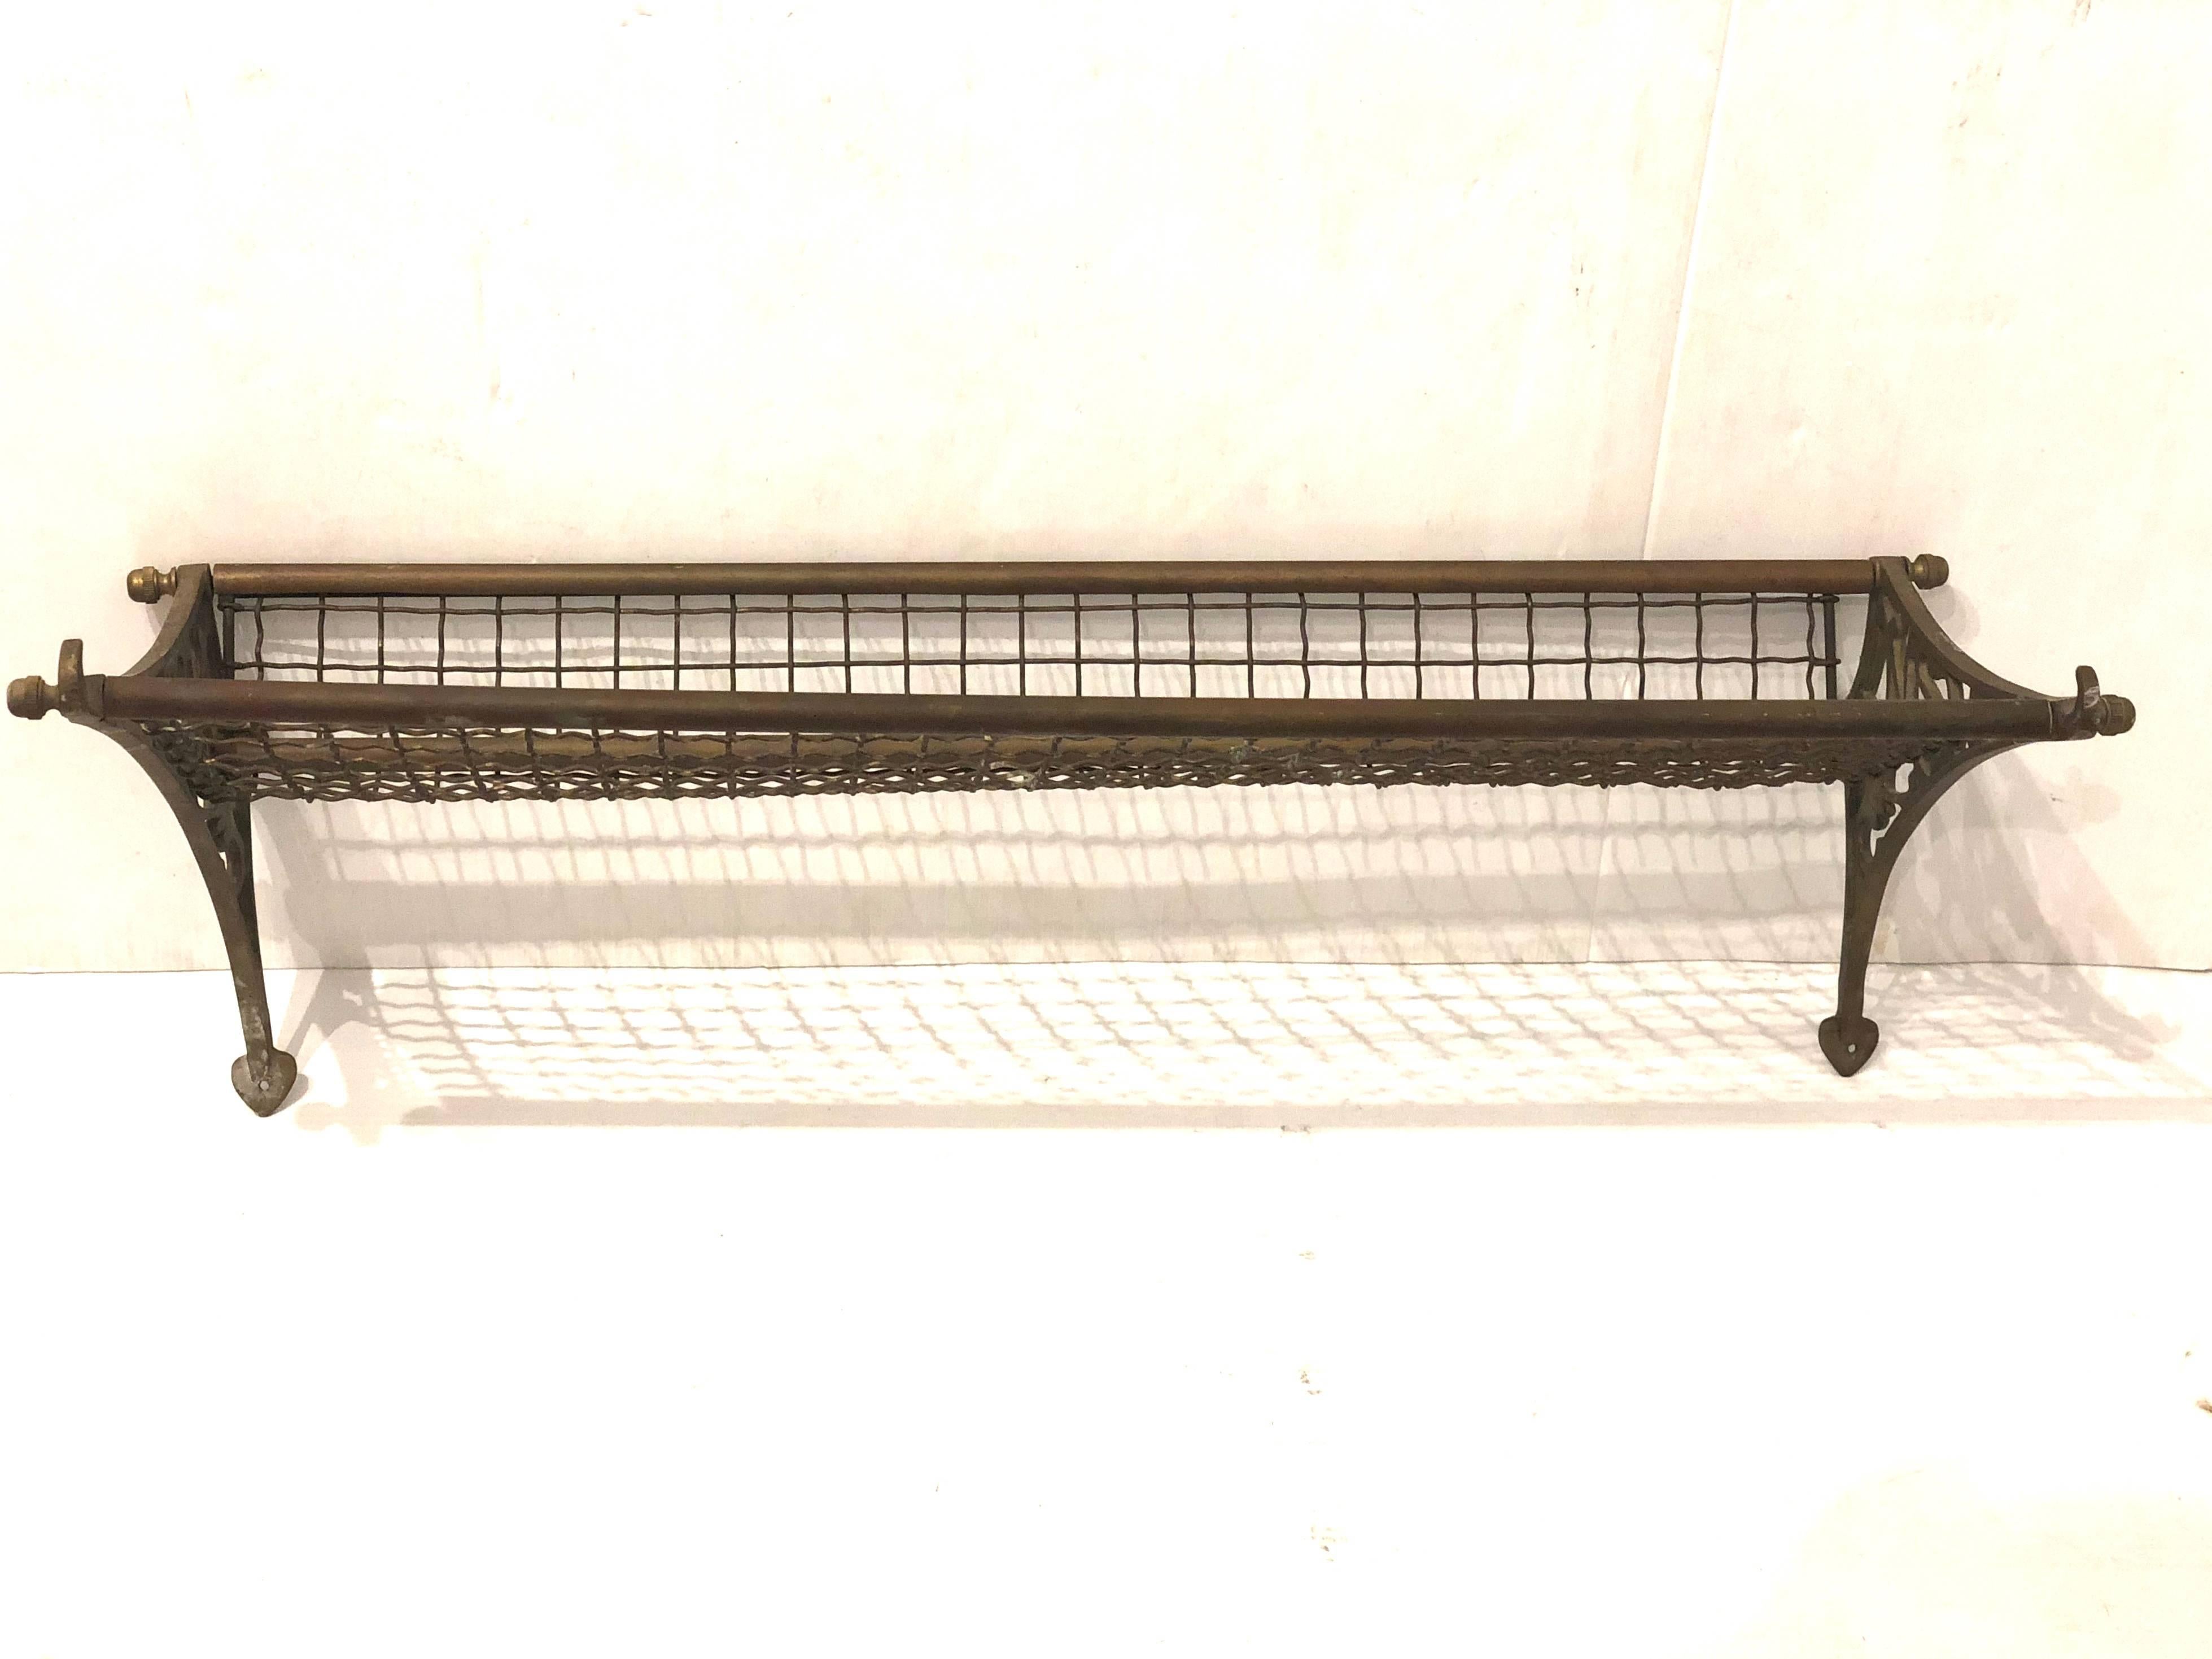 Rare antique patinated solid copper and brass railroad train or bus luggage rack, easy to install three screws on each side. Original finish that can be polished if desired.